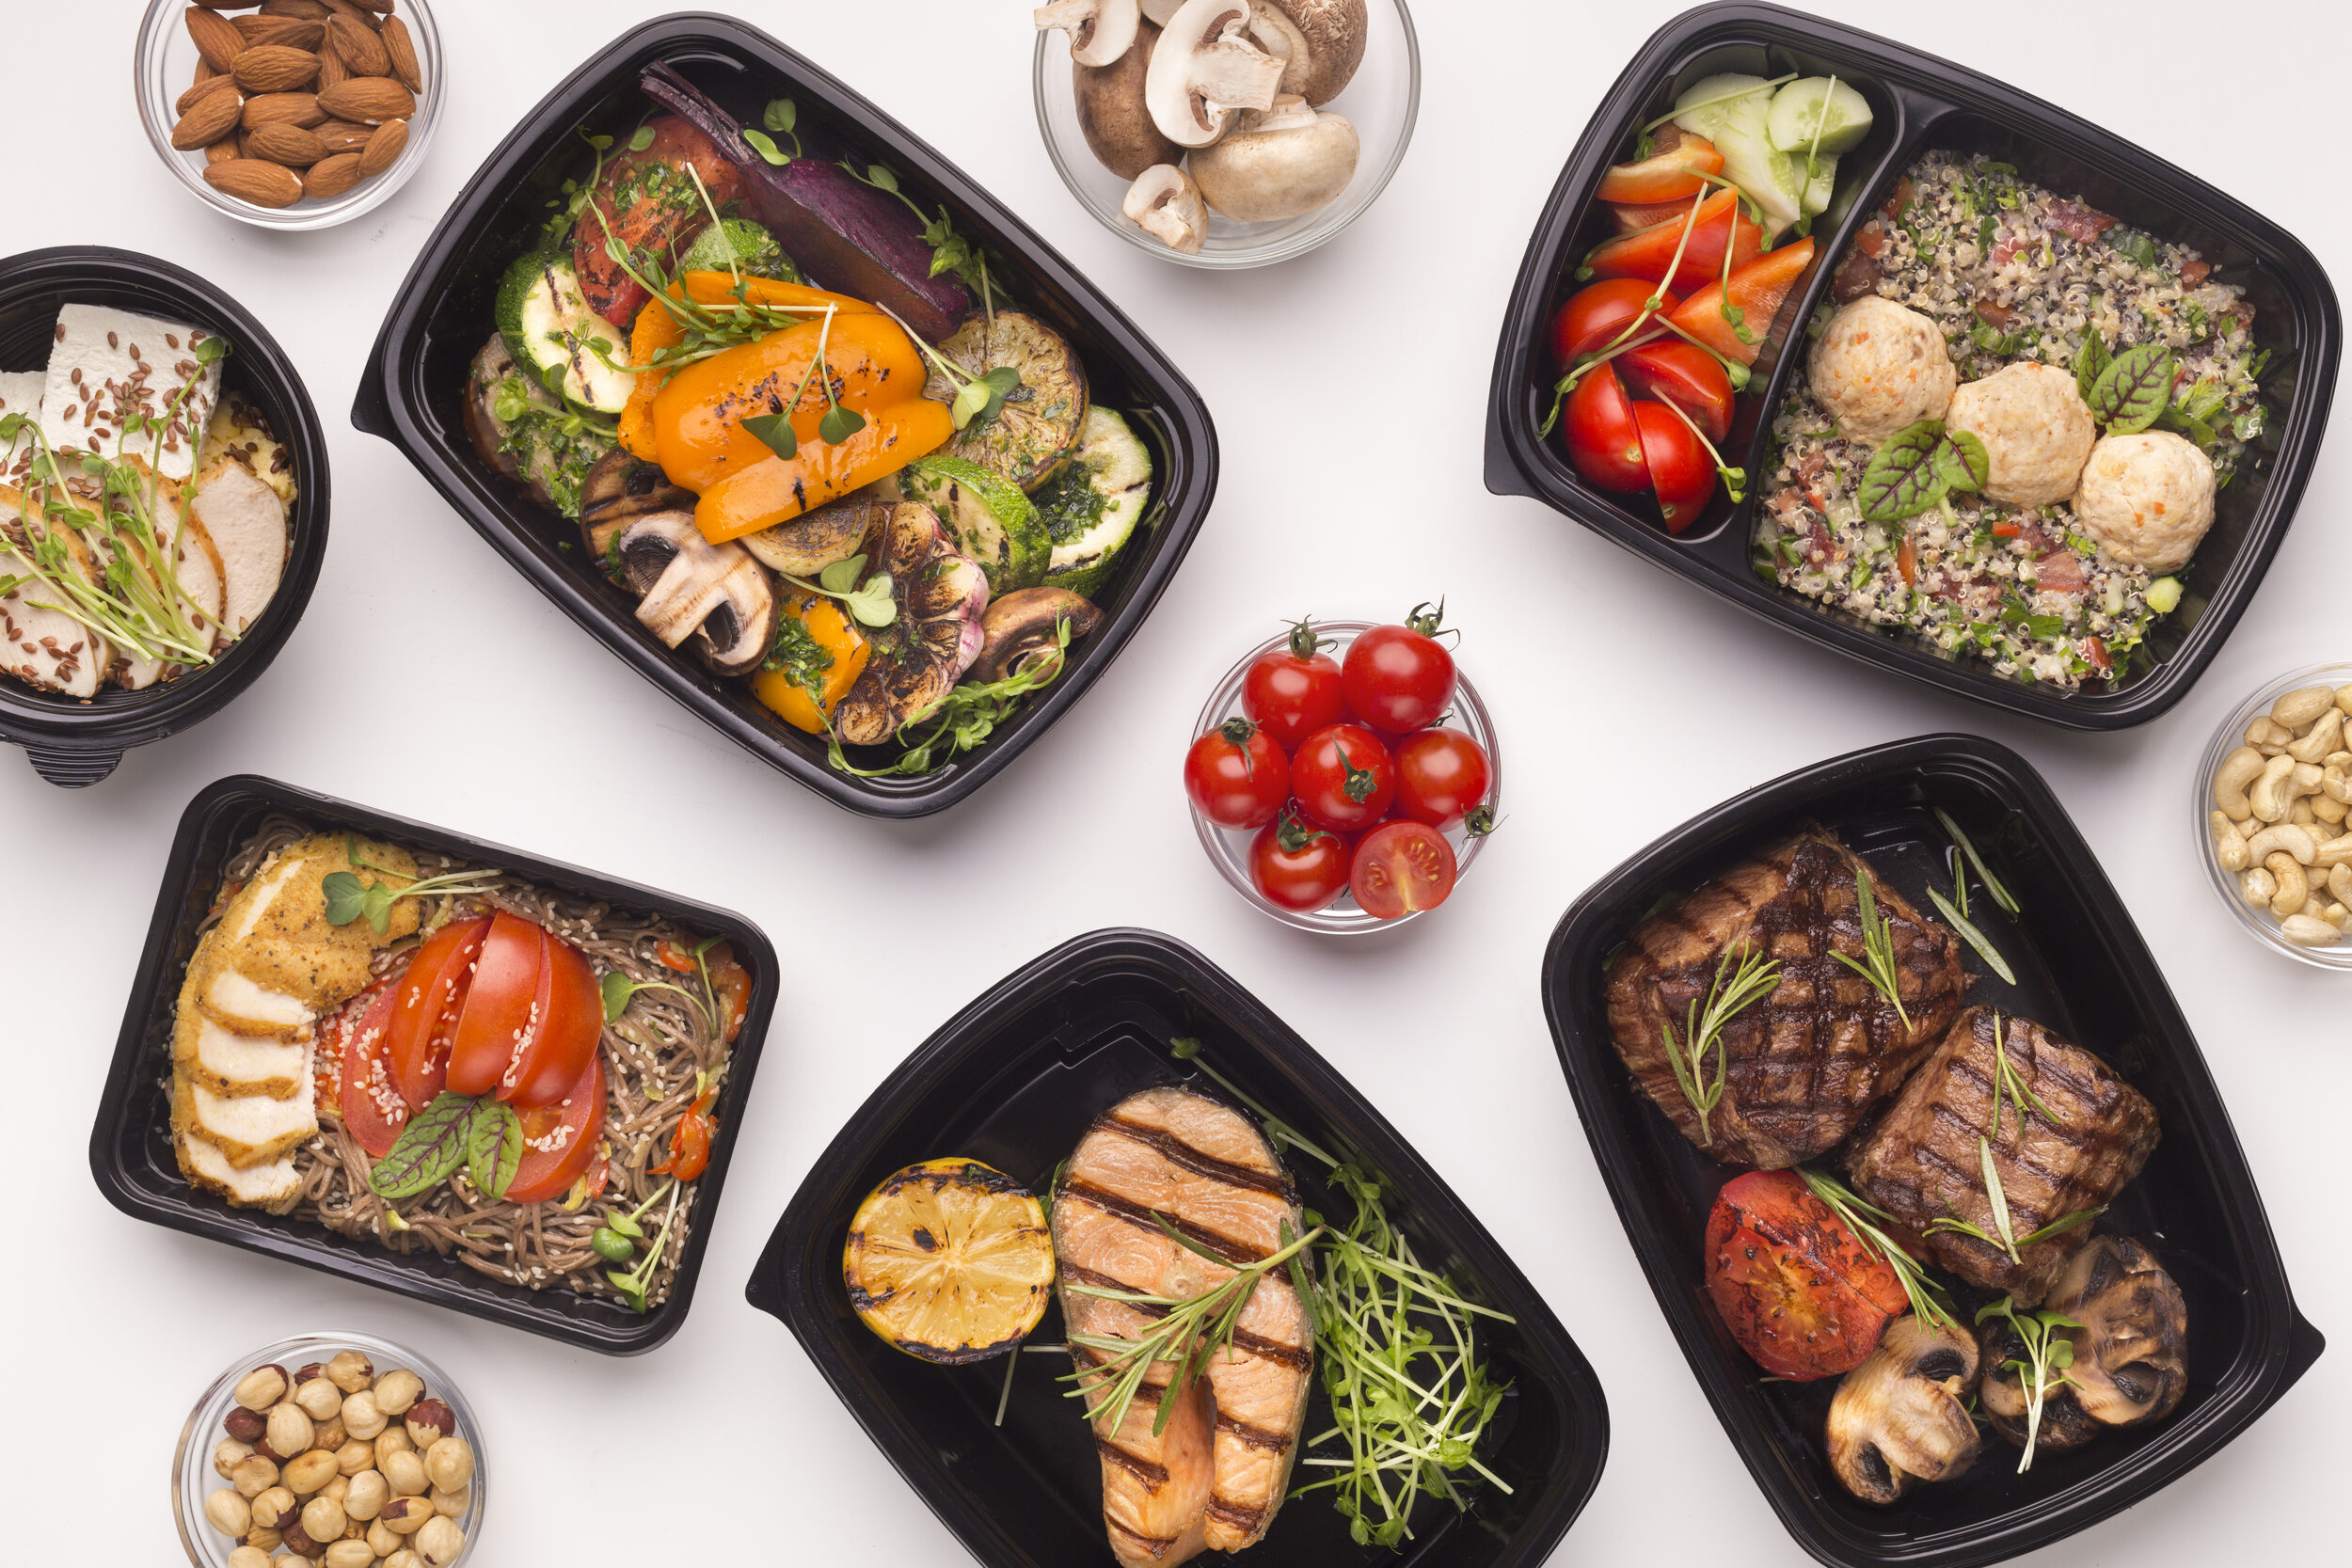 Paleo Meal Delivery Service (Open Now)